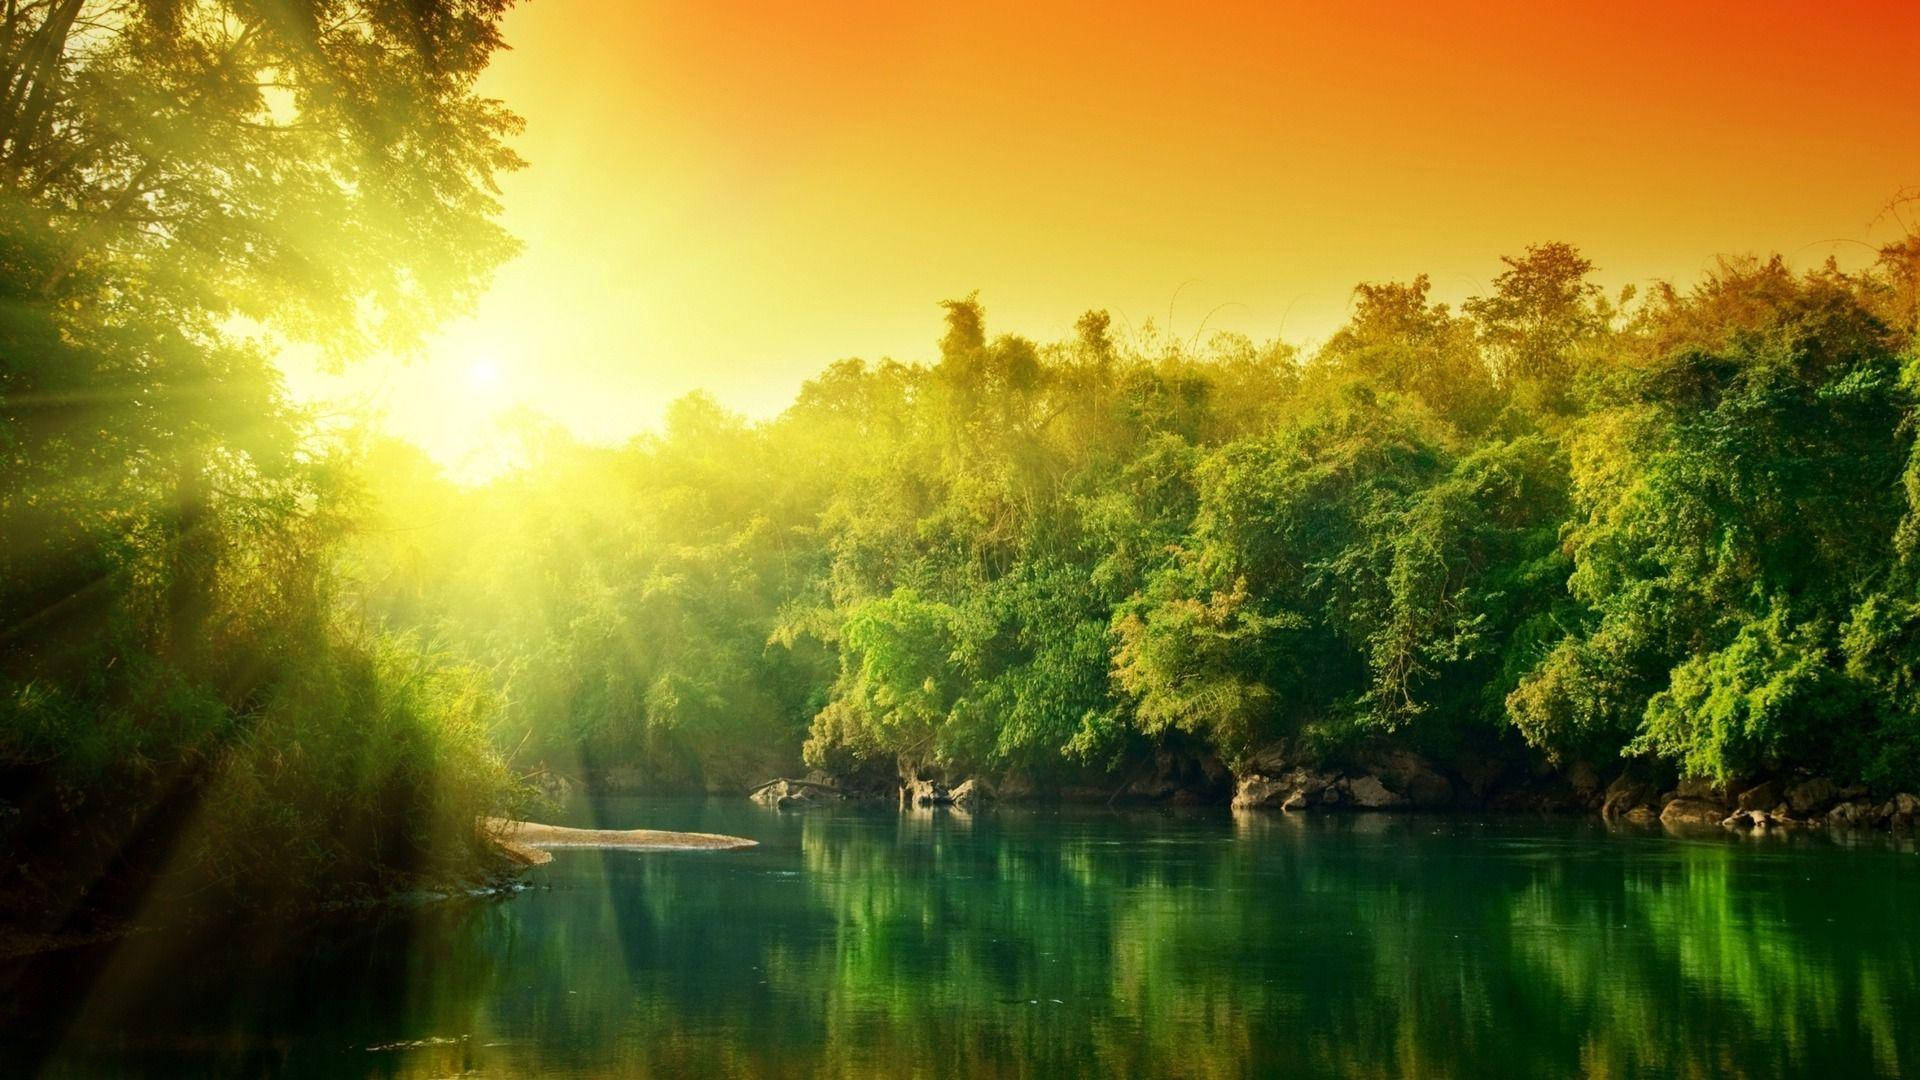 Hd Nature Trees And River Background